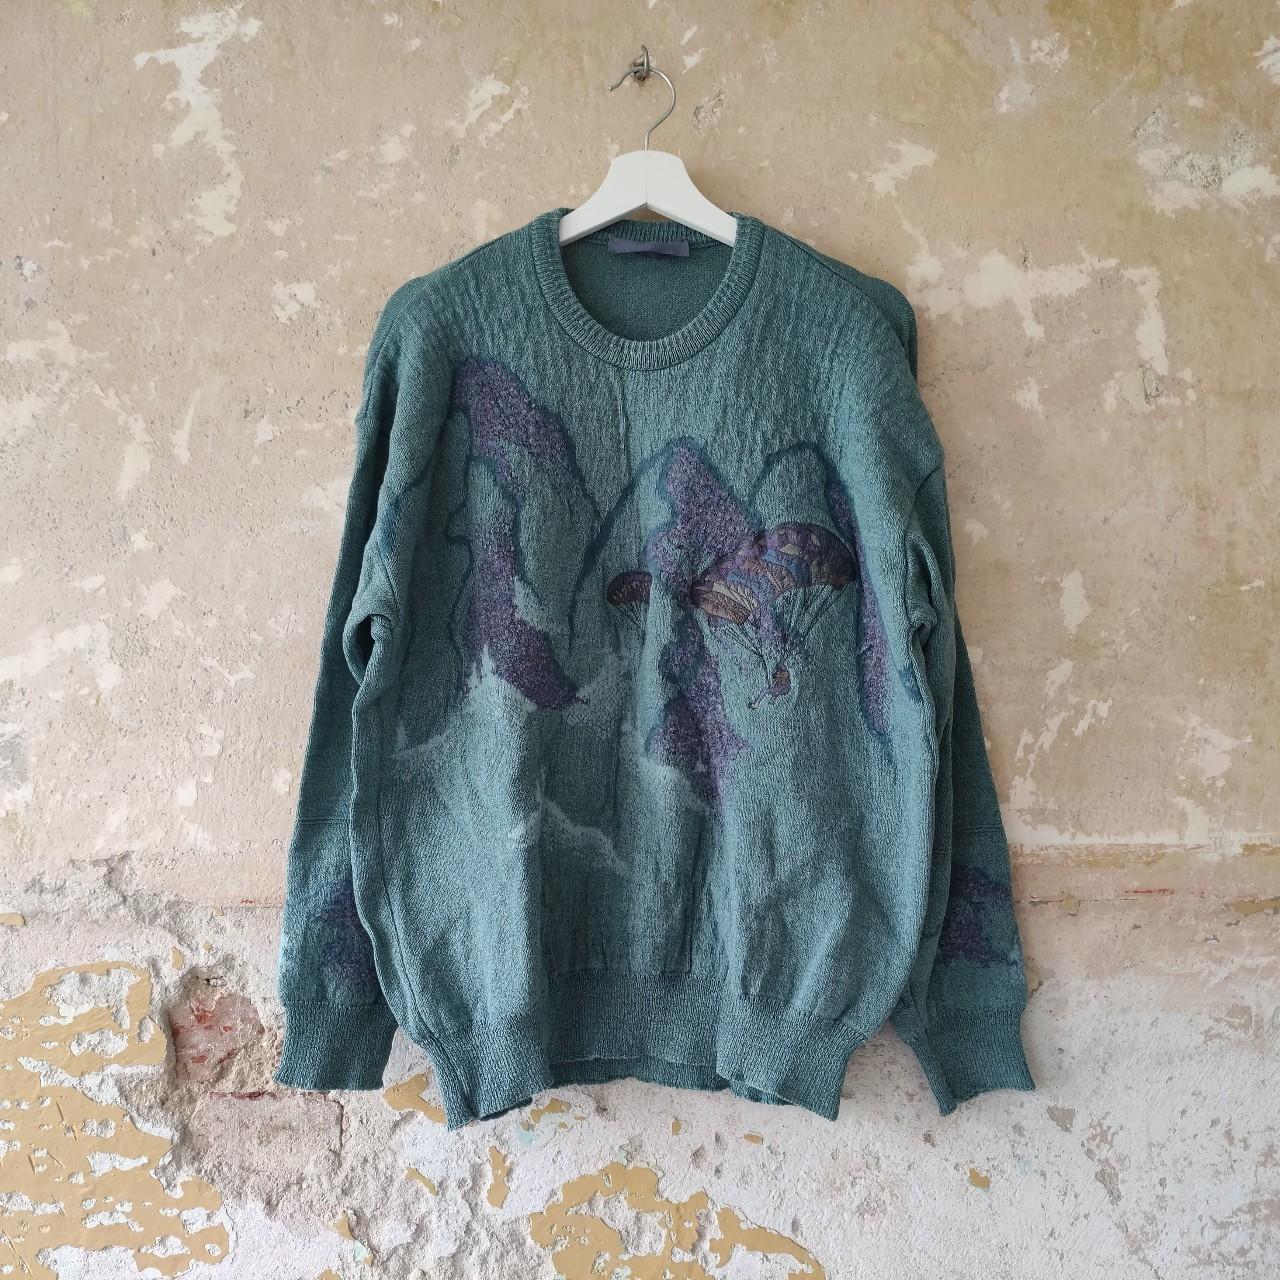 Vintage sweater with embroidery from 90s Fits 52 /... - Depop